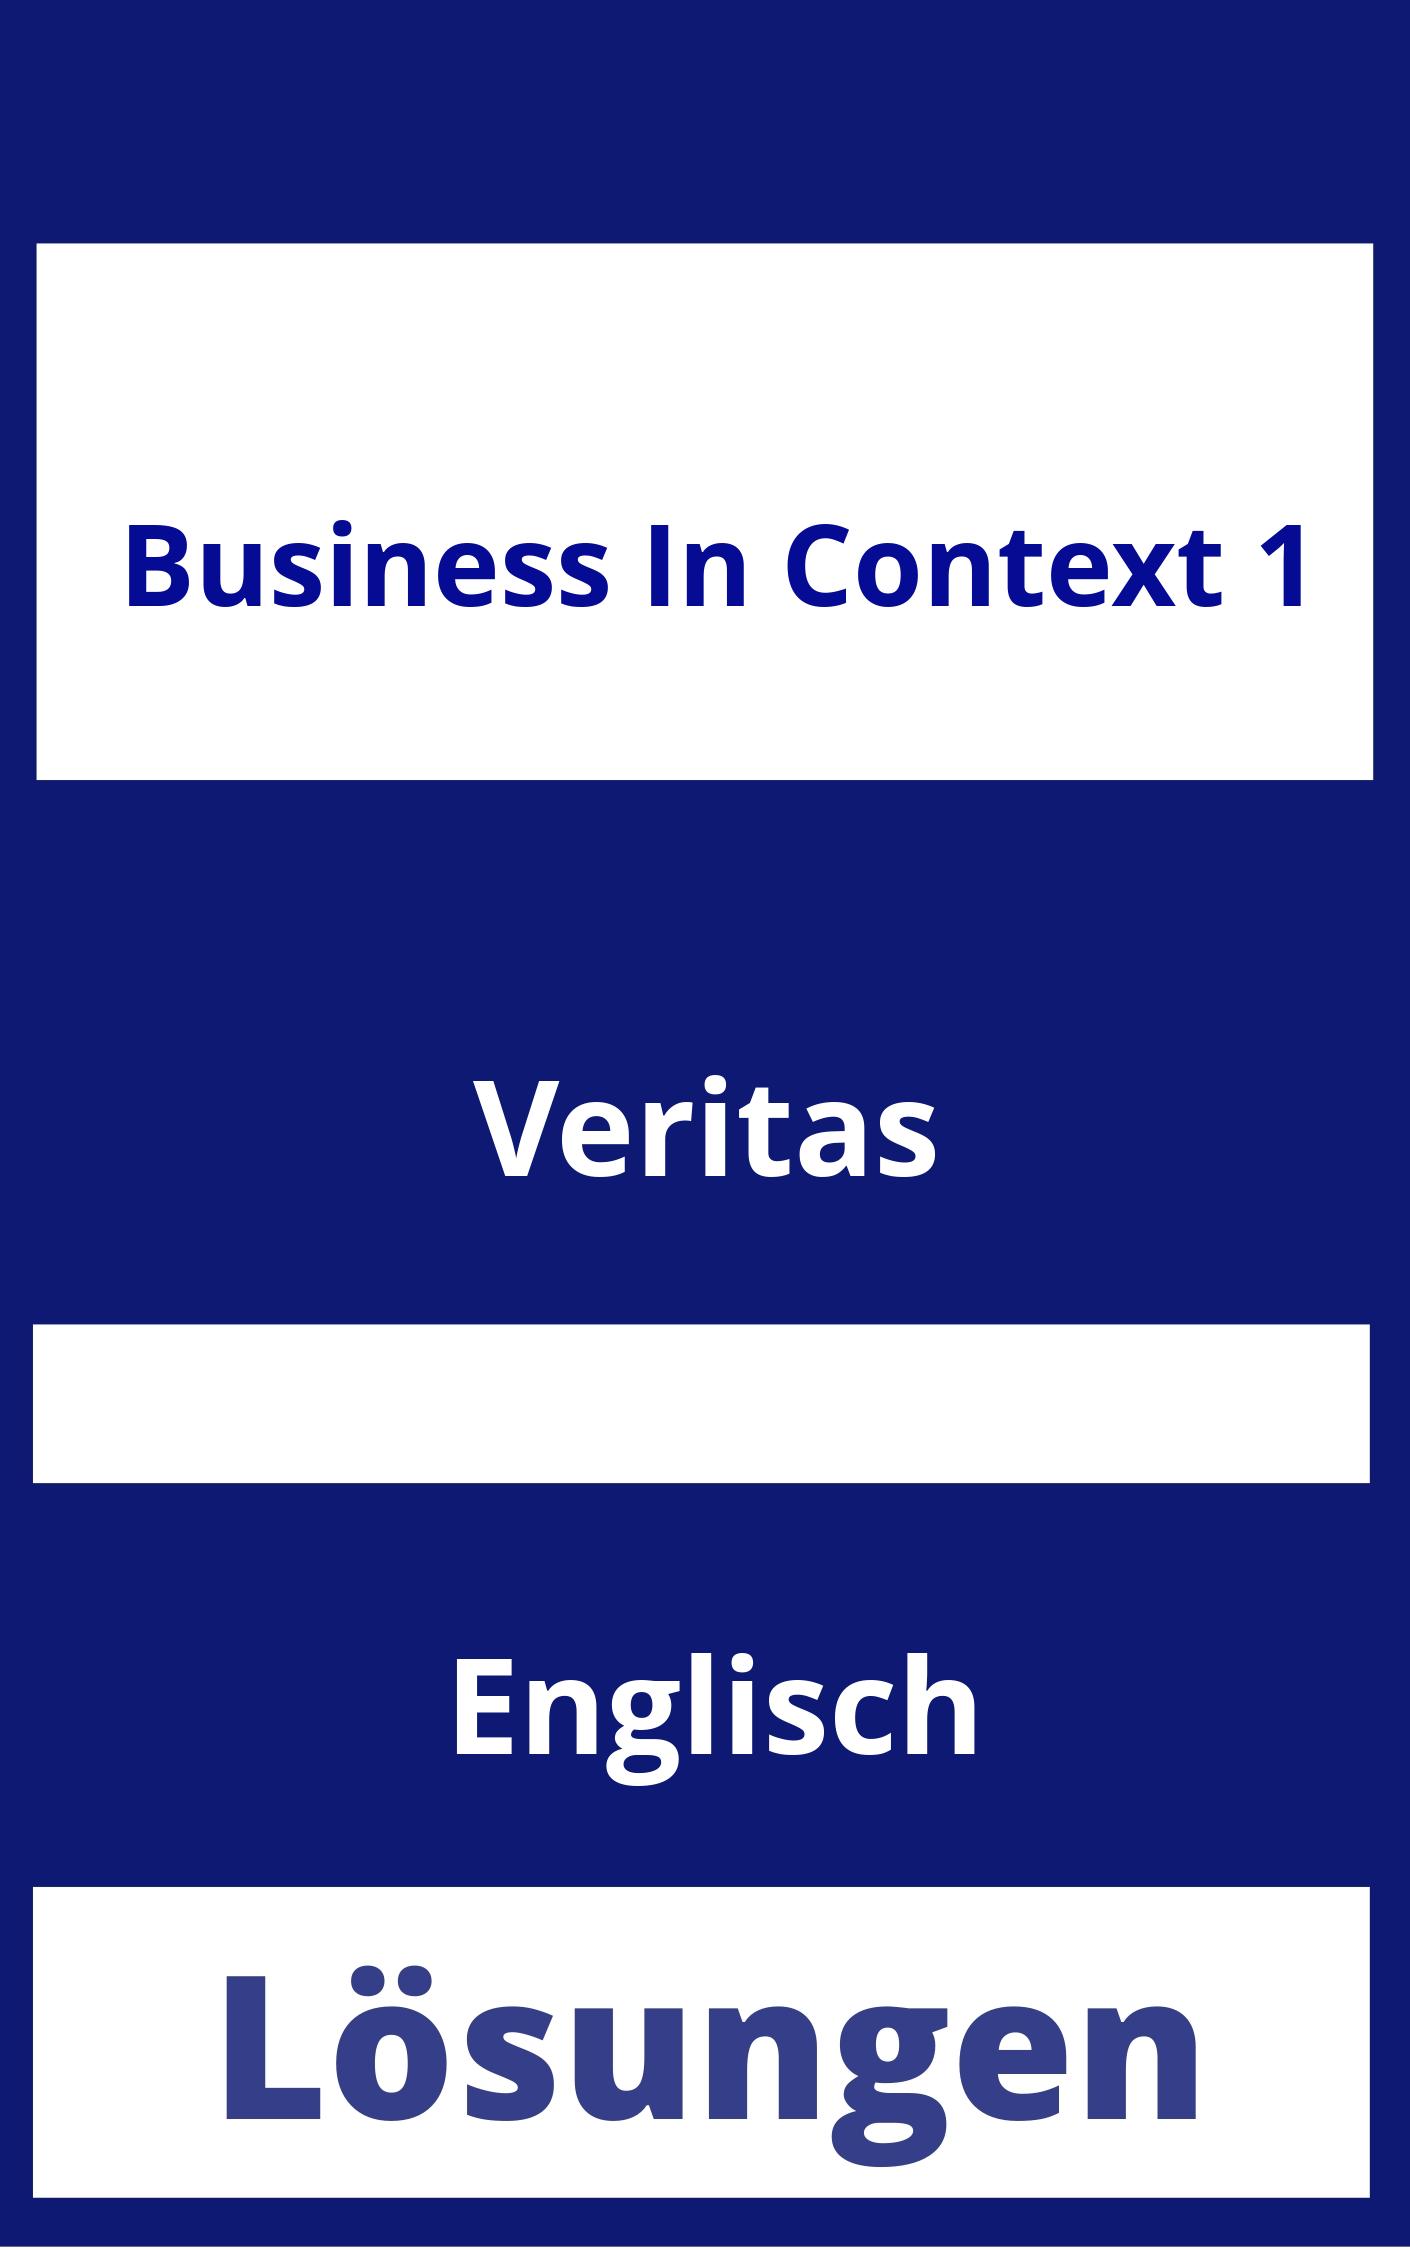 Business in context 1